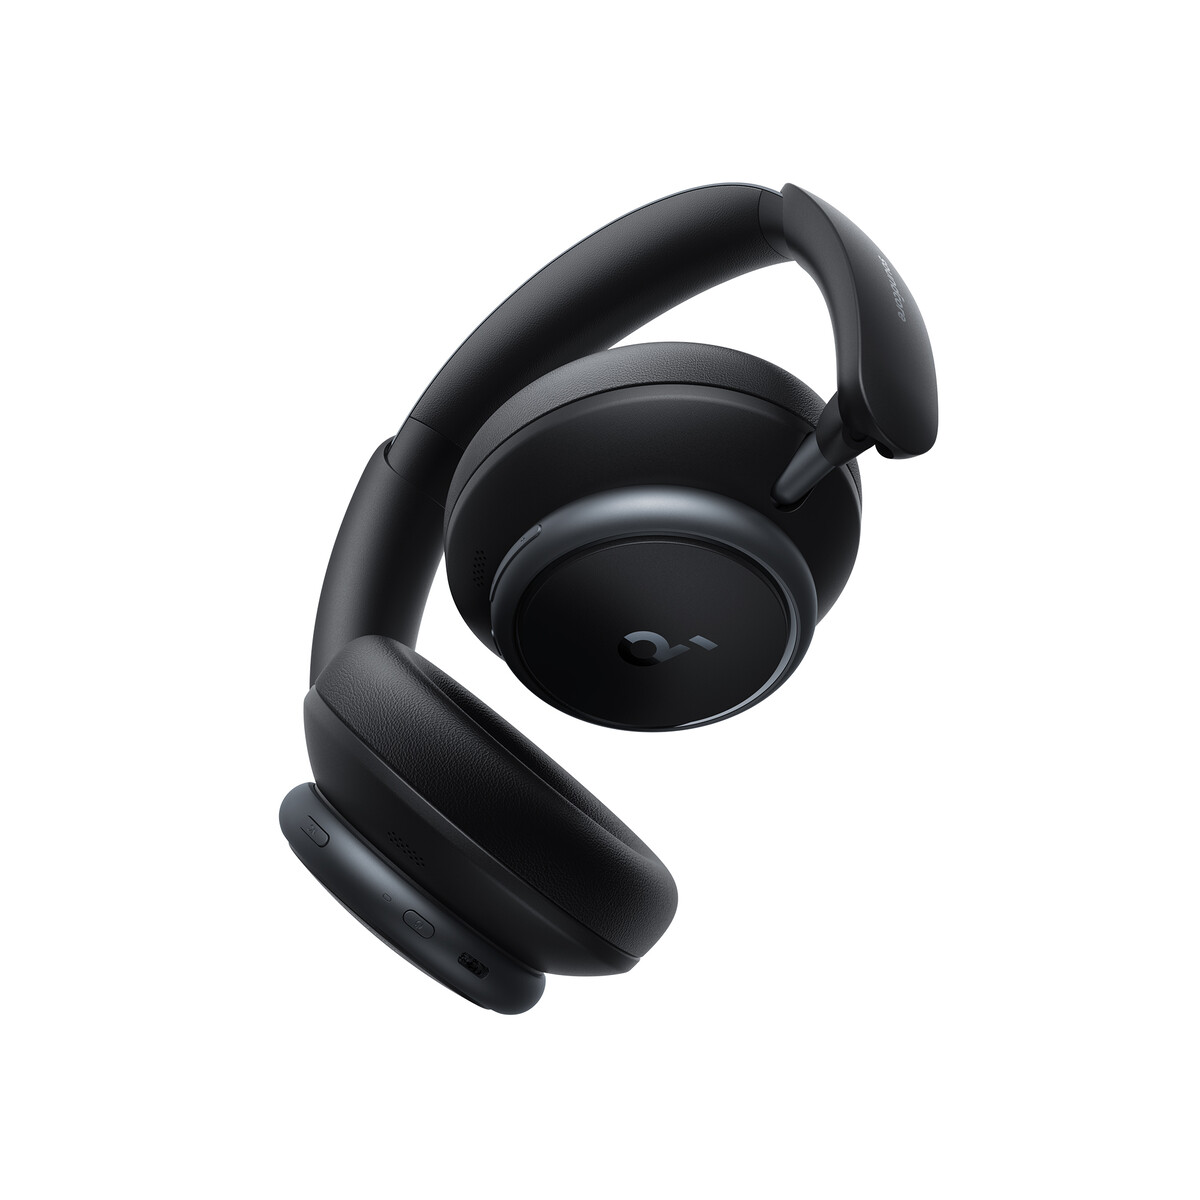 Soundcore Space Q45 headphones and A45 wireless earbuds launch 